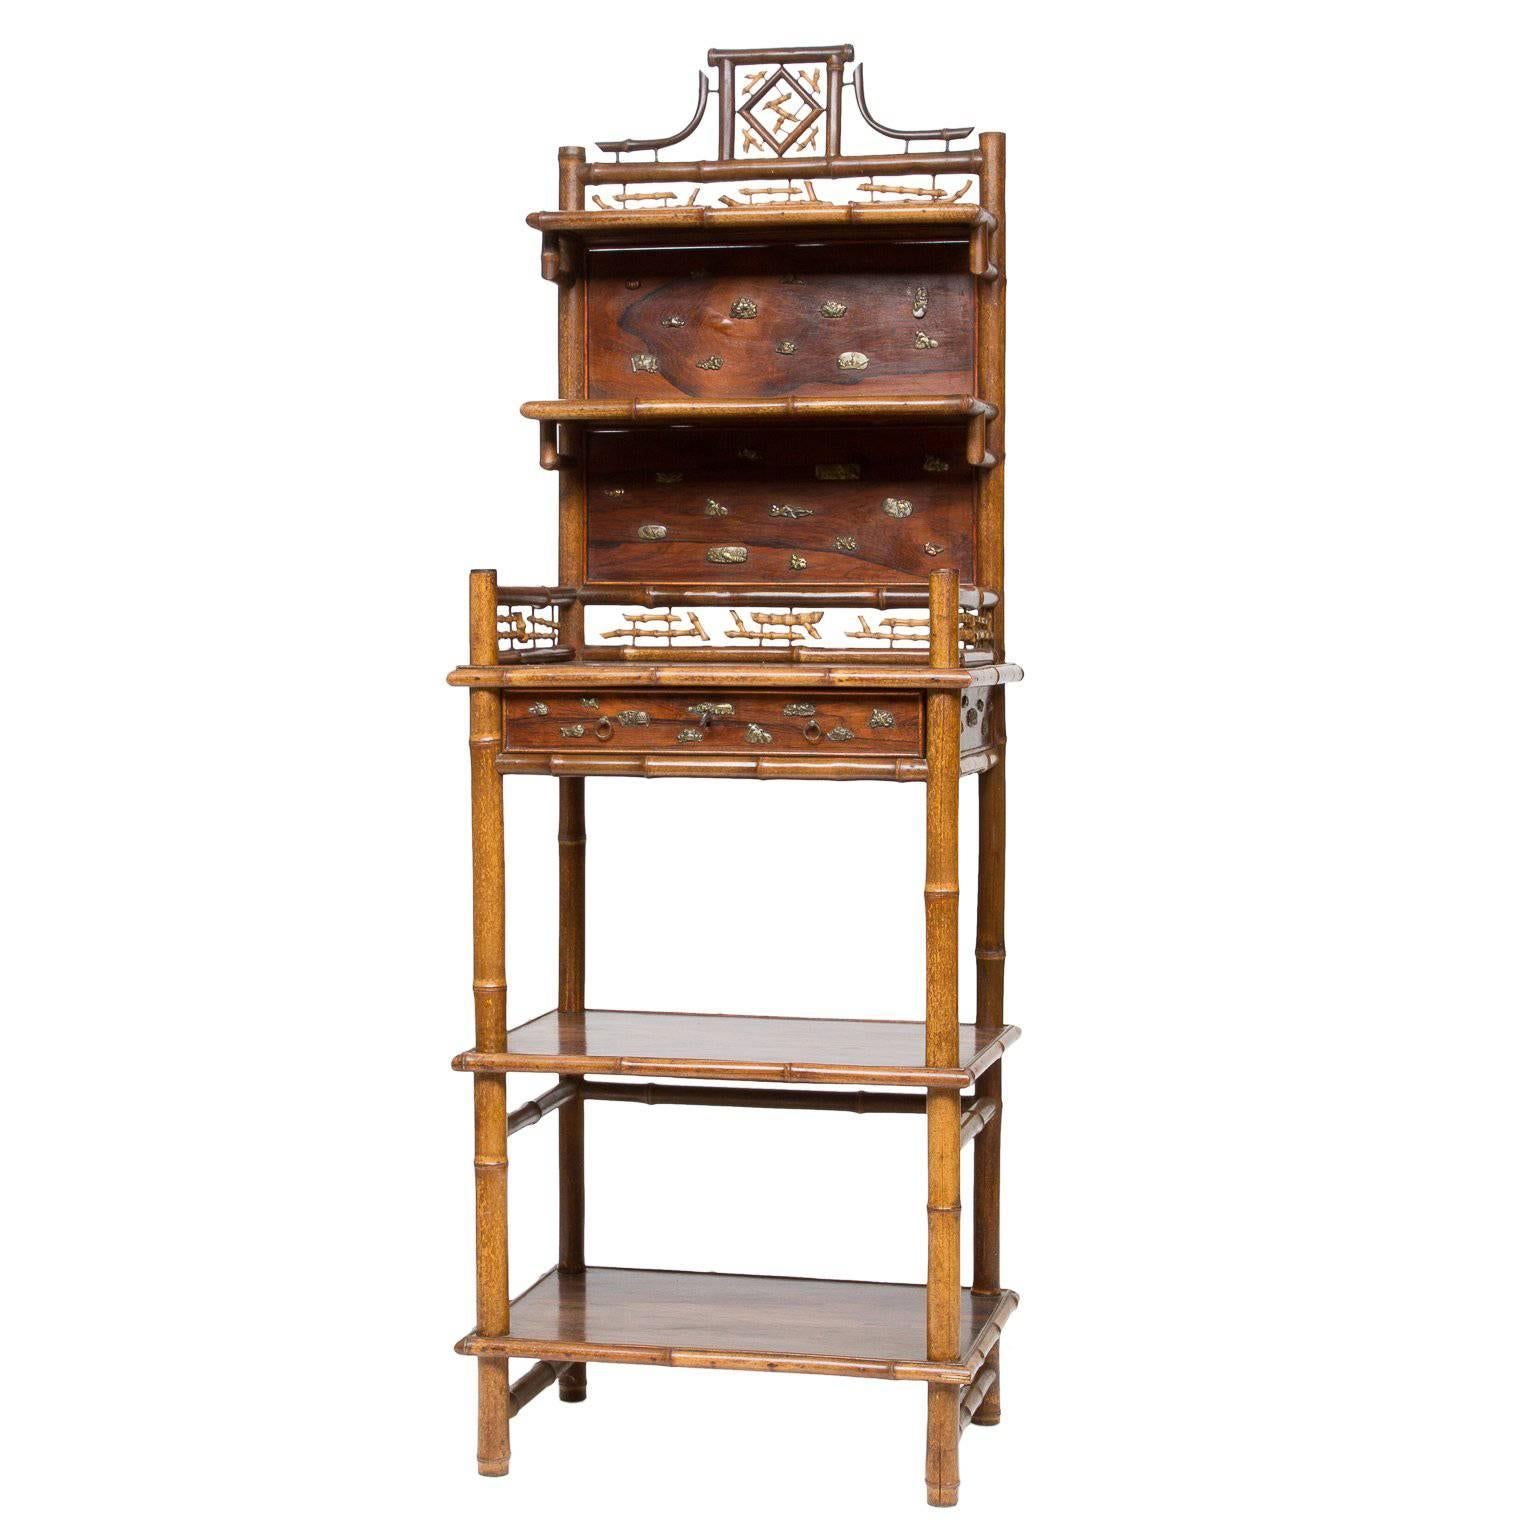 19th Century Asian Inspired Etagere Stand